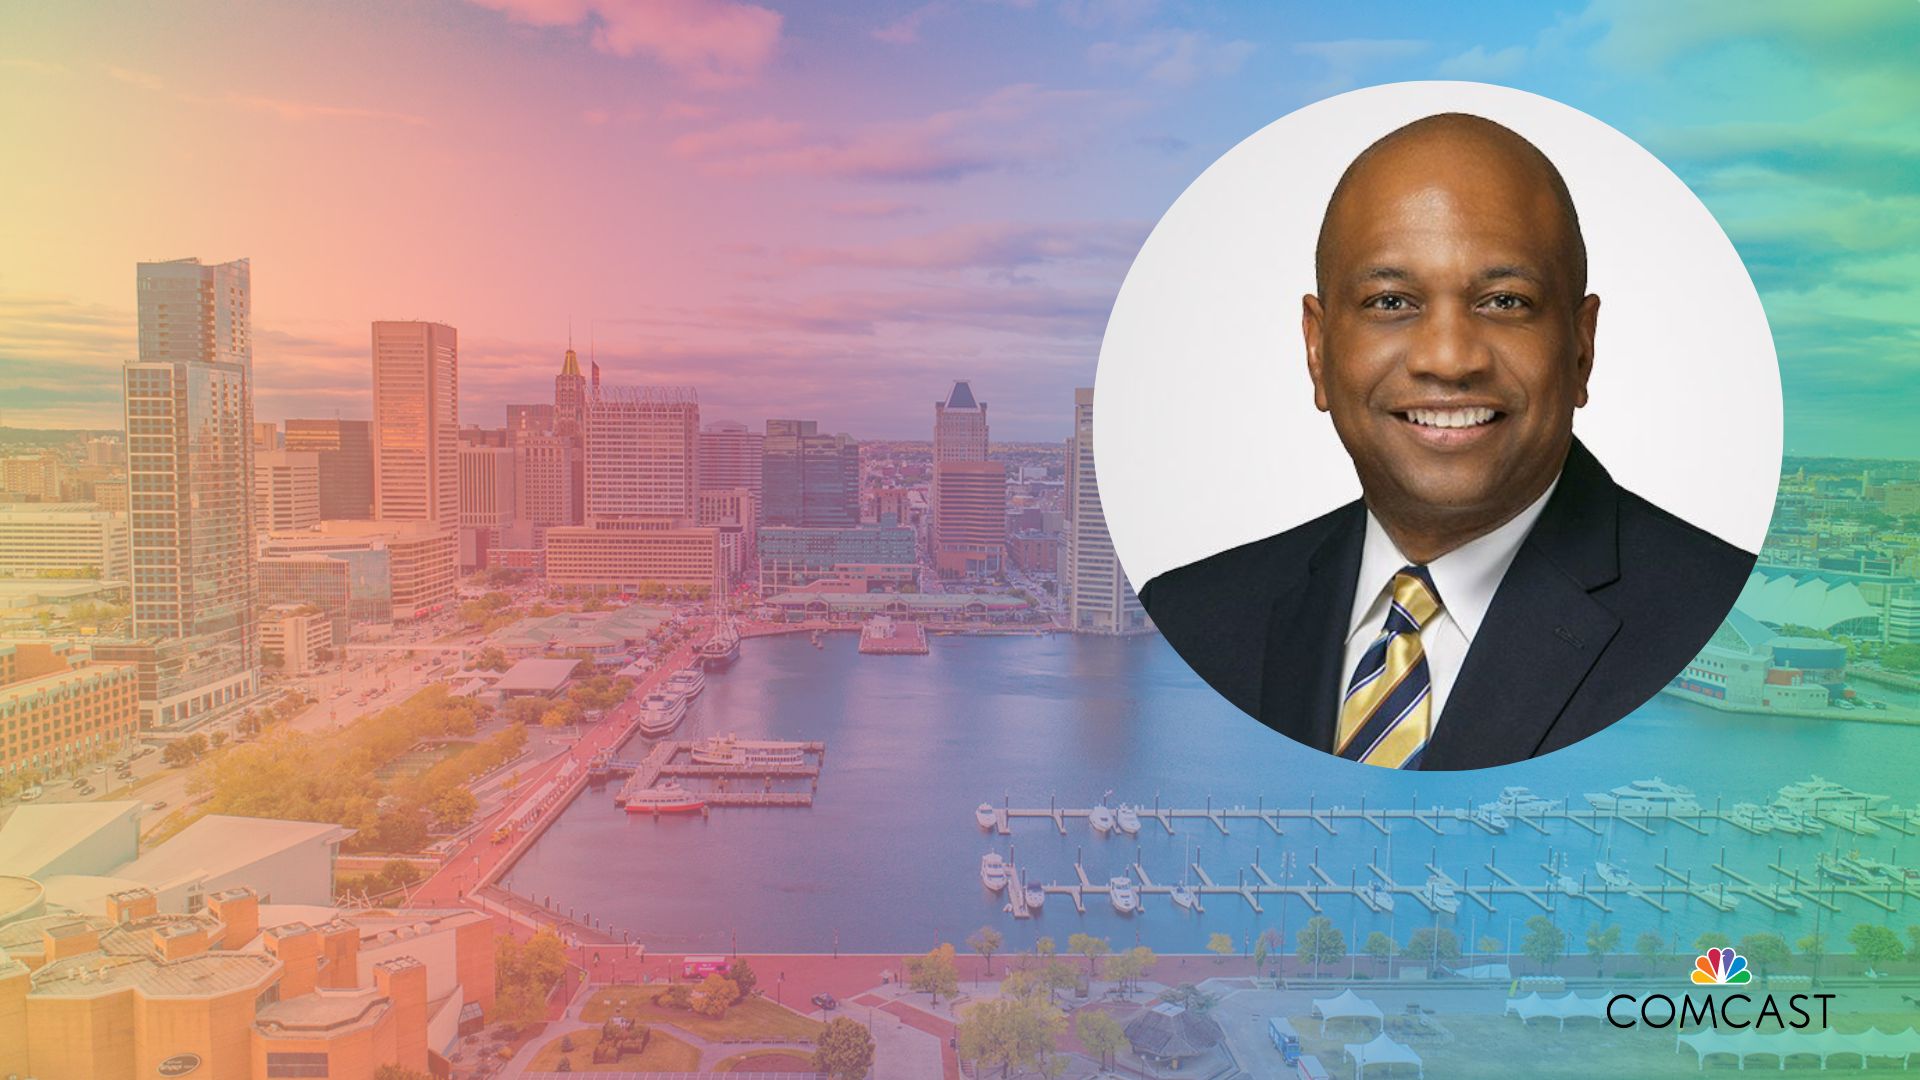 Comcast Names Ray Roundtree Top Executive for Beltway Region